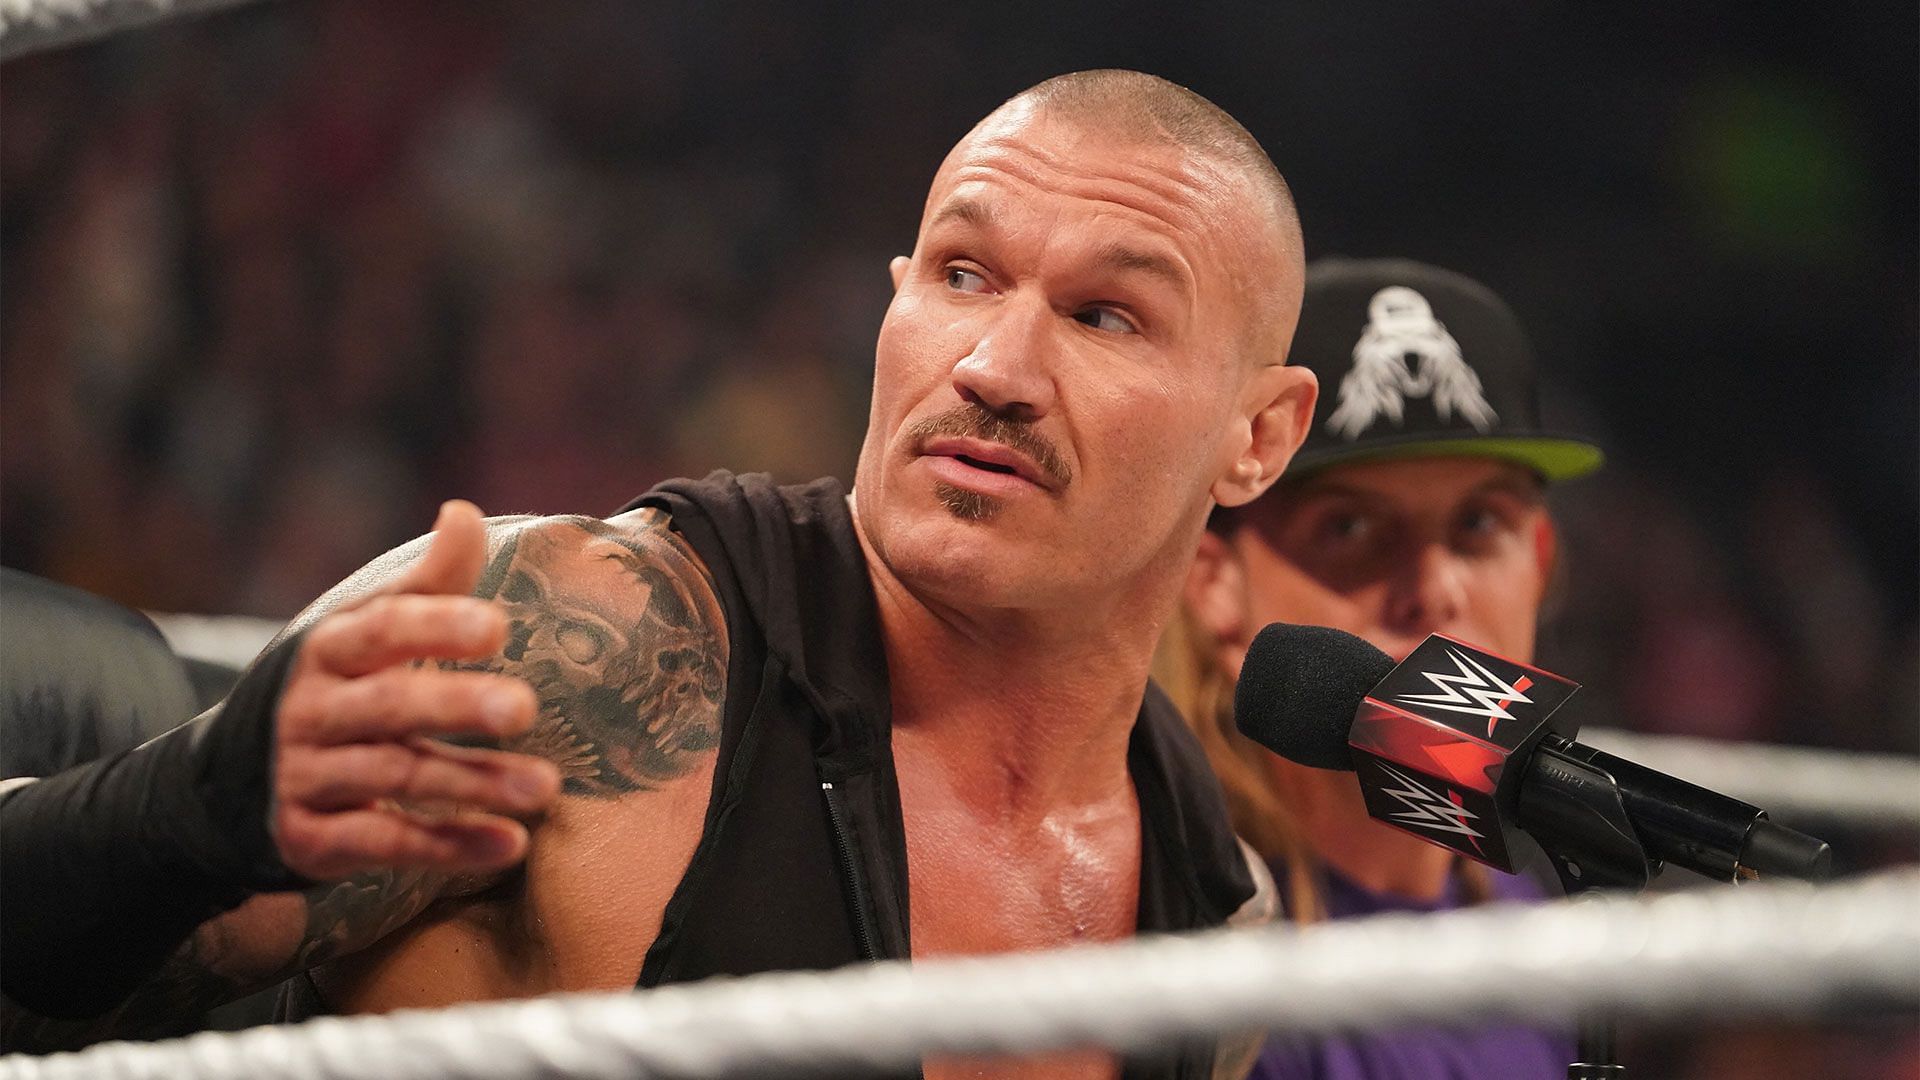 Randy Orton's future in WWE reportedly seems unclear